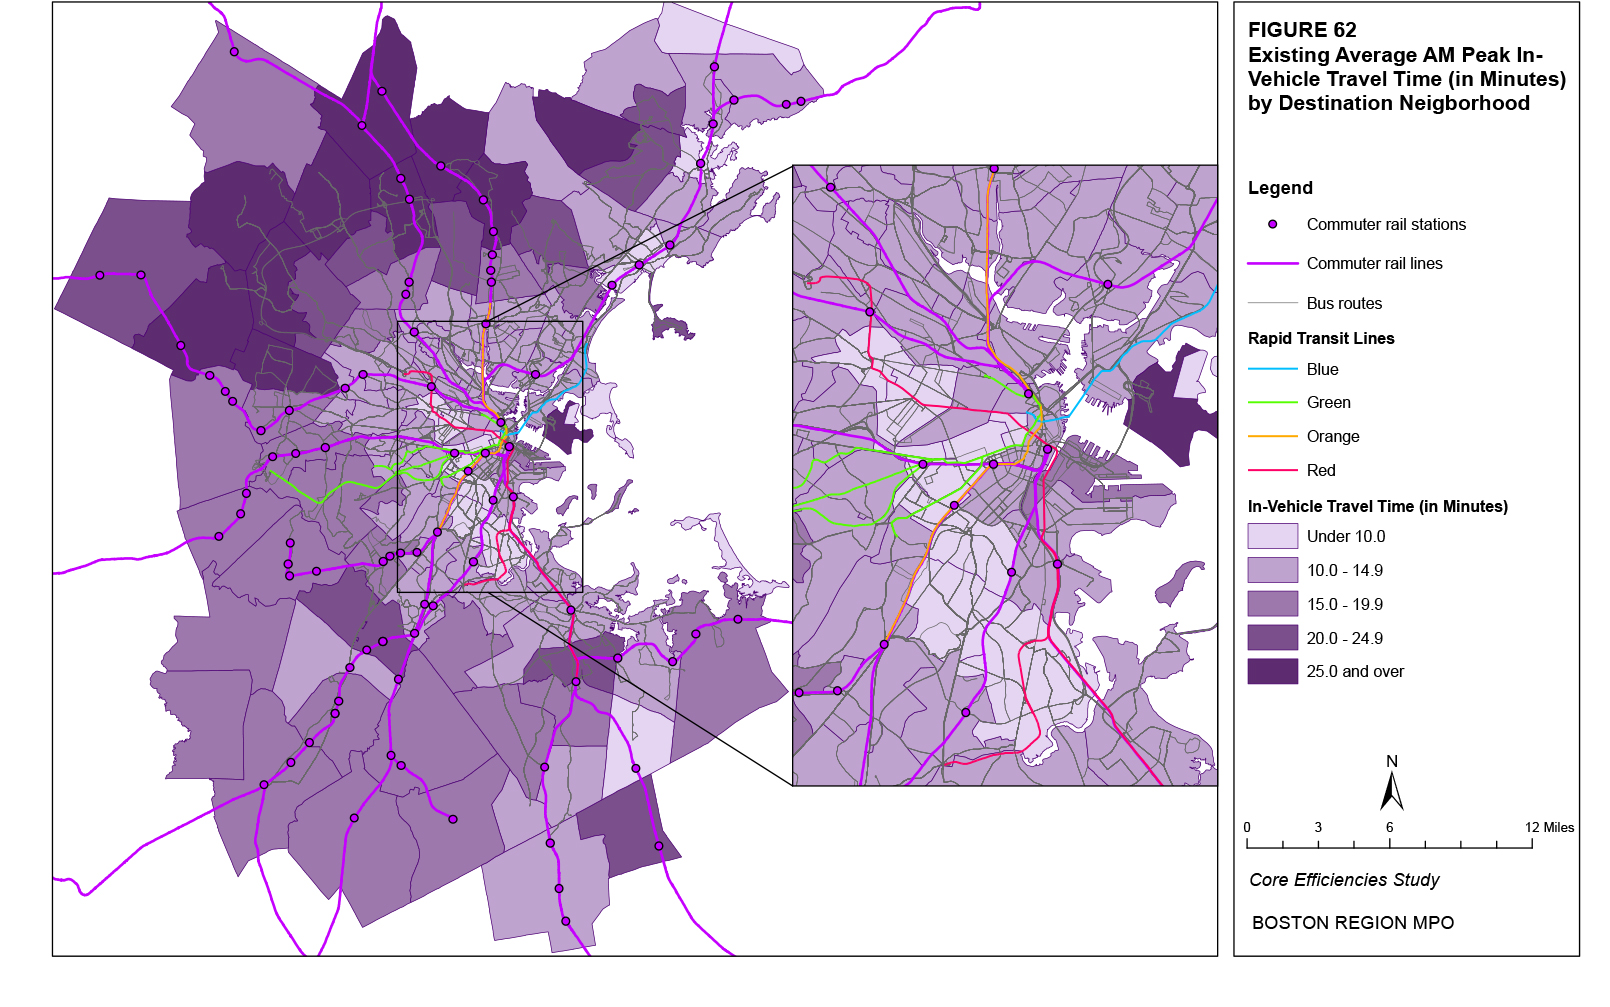 This map shows the existing average AM peak travel times for destination trips by neighborhood.